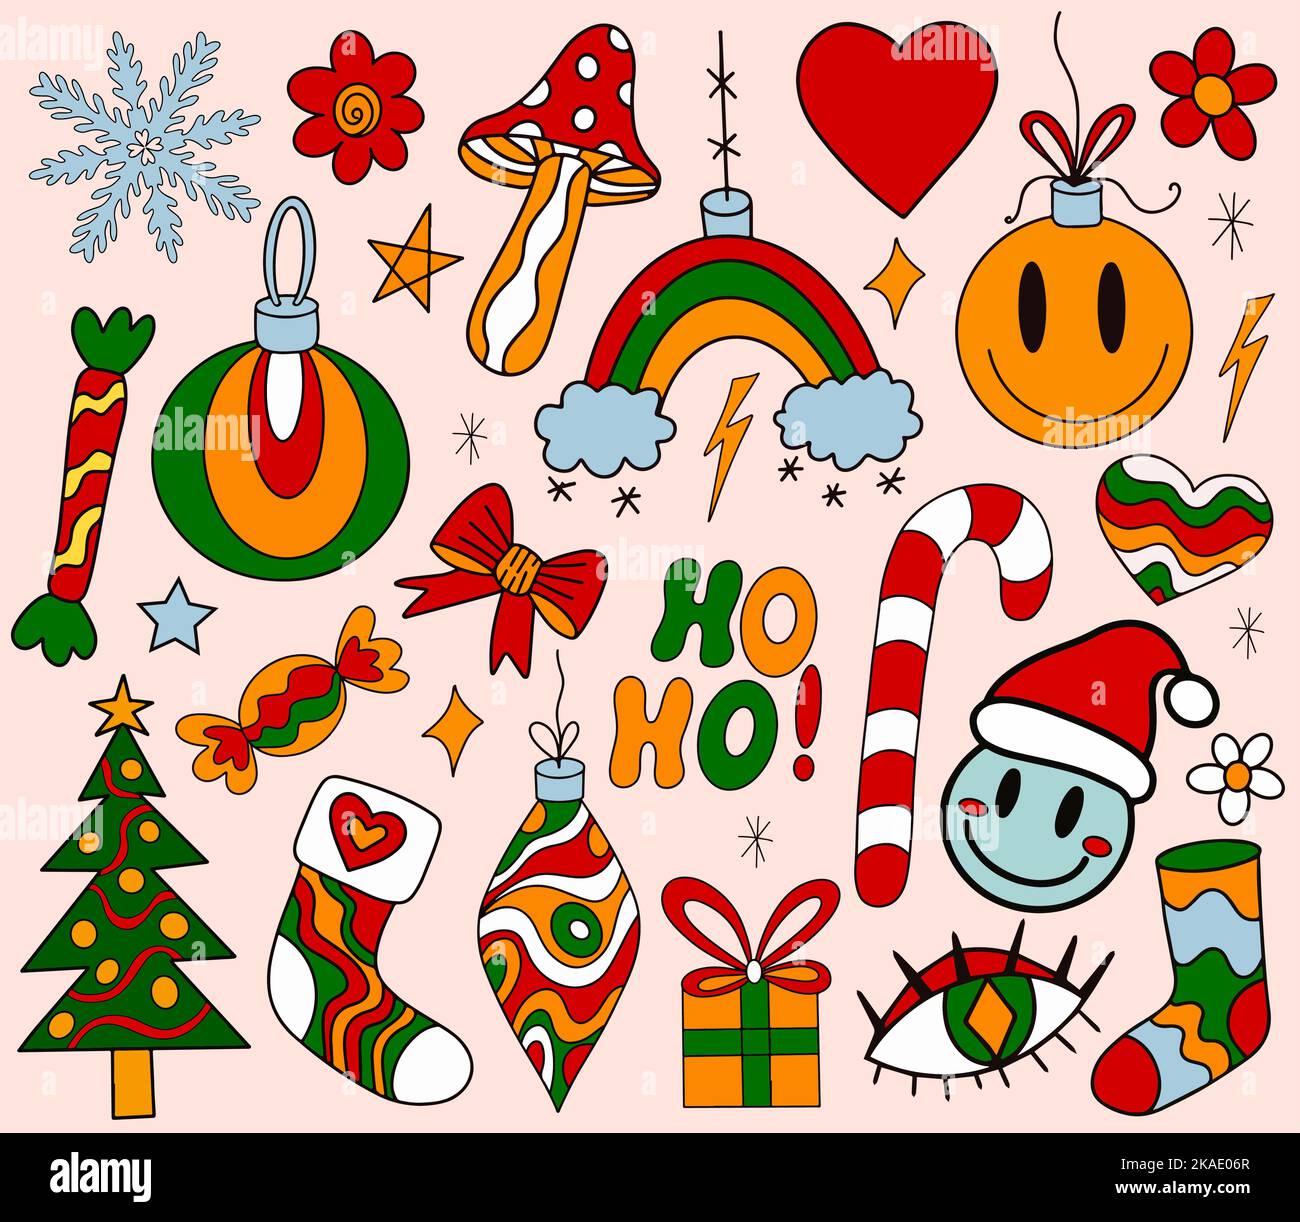 Merry Christmas groovy retro 70s set elements. Hippie holiday collection clip art hand drawing style. Christmas tree, snowflakes, gifts modern trendy Stock Vector